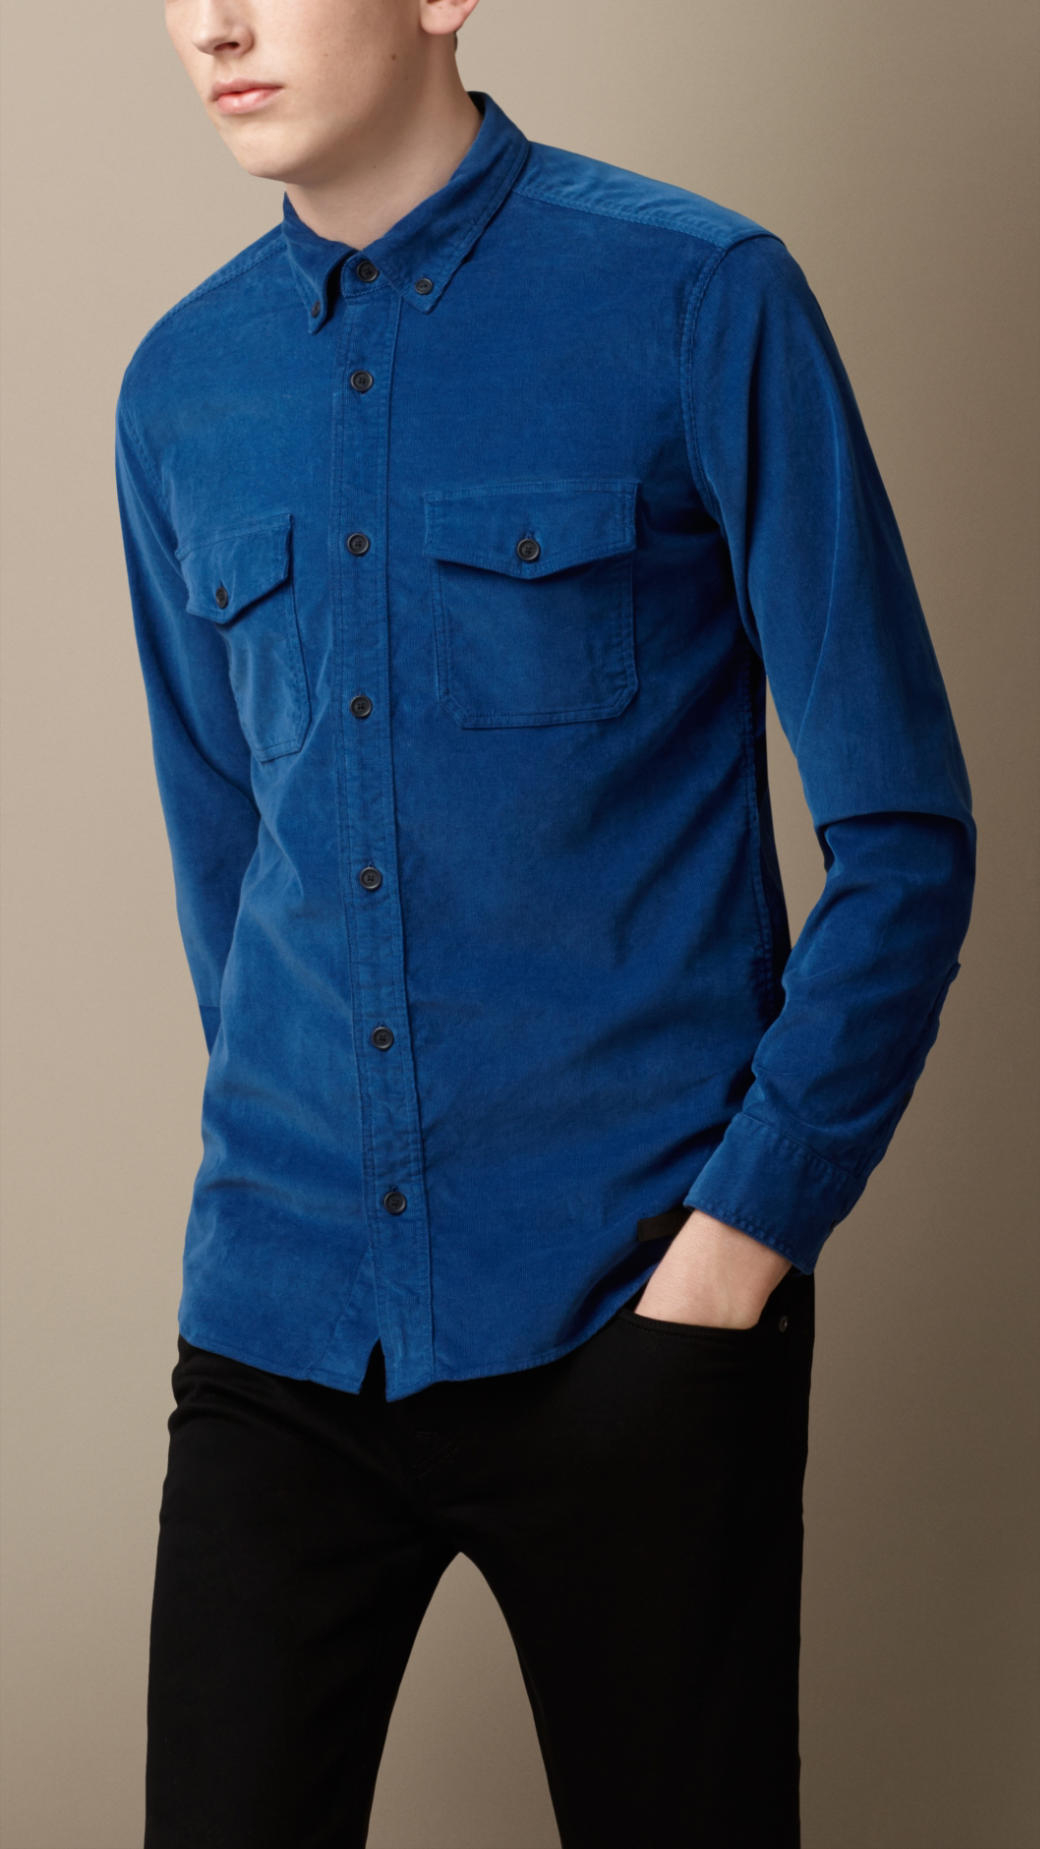 Lyst - Burberry Button-Down Corduroy Shirt in Blue for Men